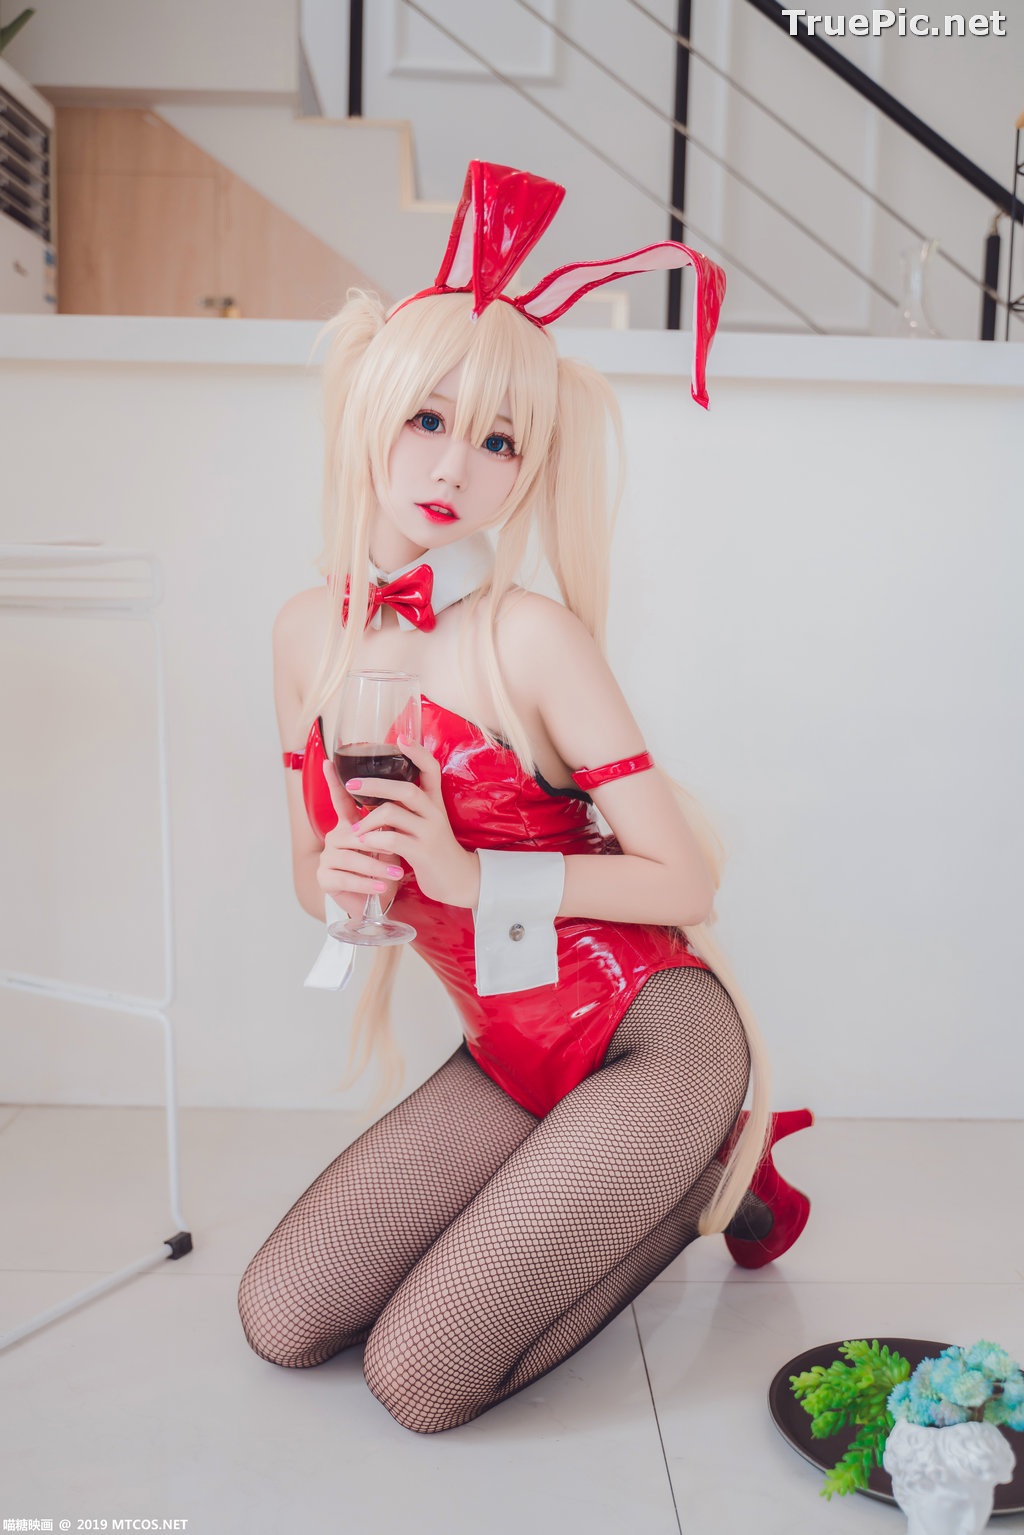 Image [MTCos] 喵糖映画 Vol.021 – Chinese Cute Model – Red Bunny Girl Cosplay - TruePic.net - Picture-40